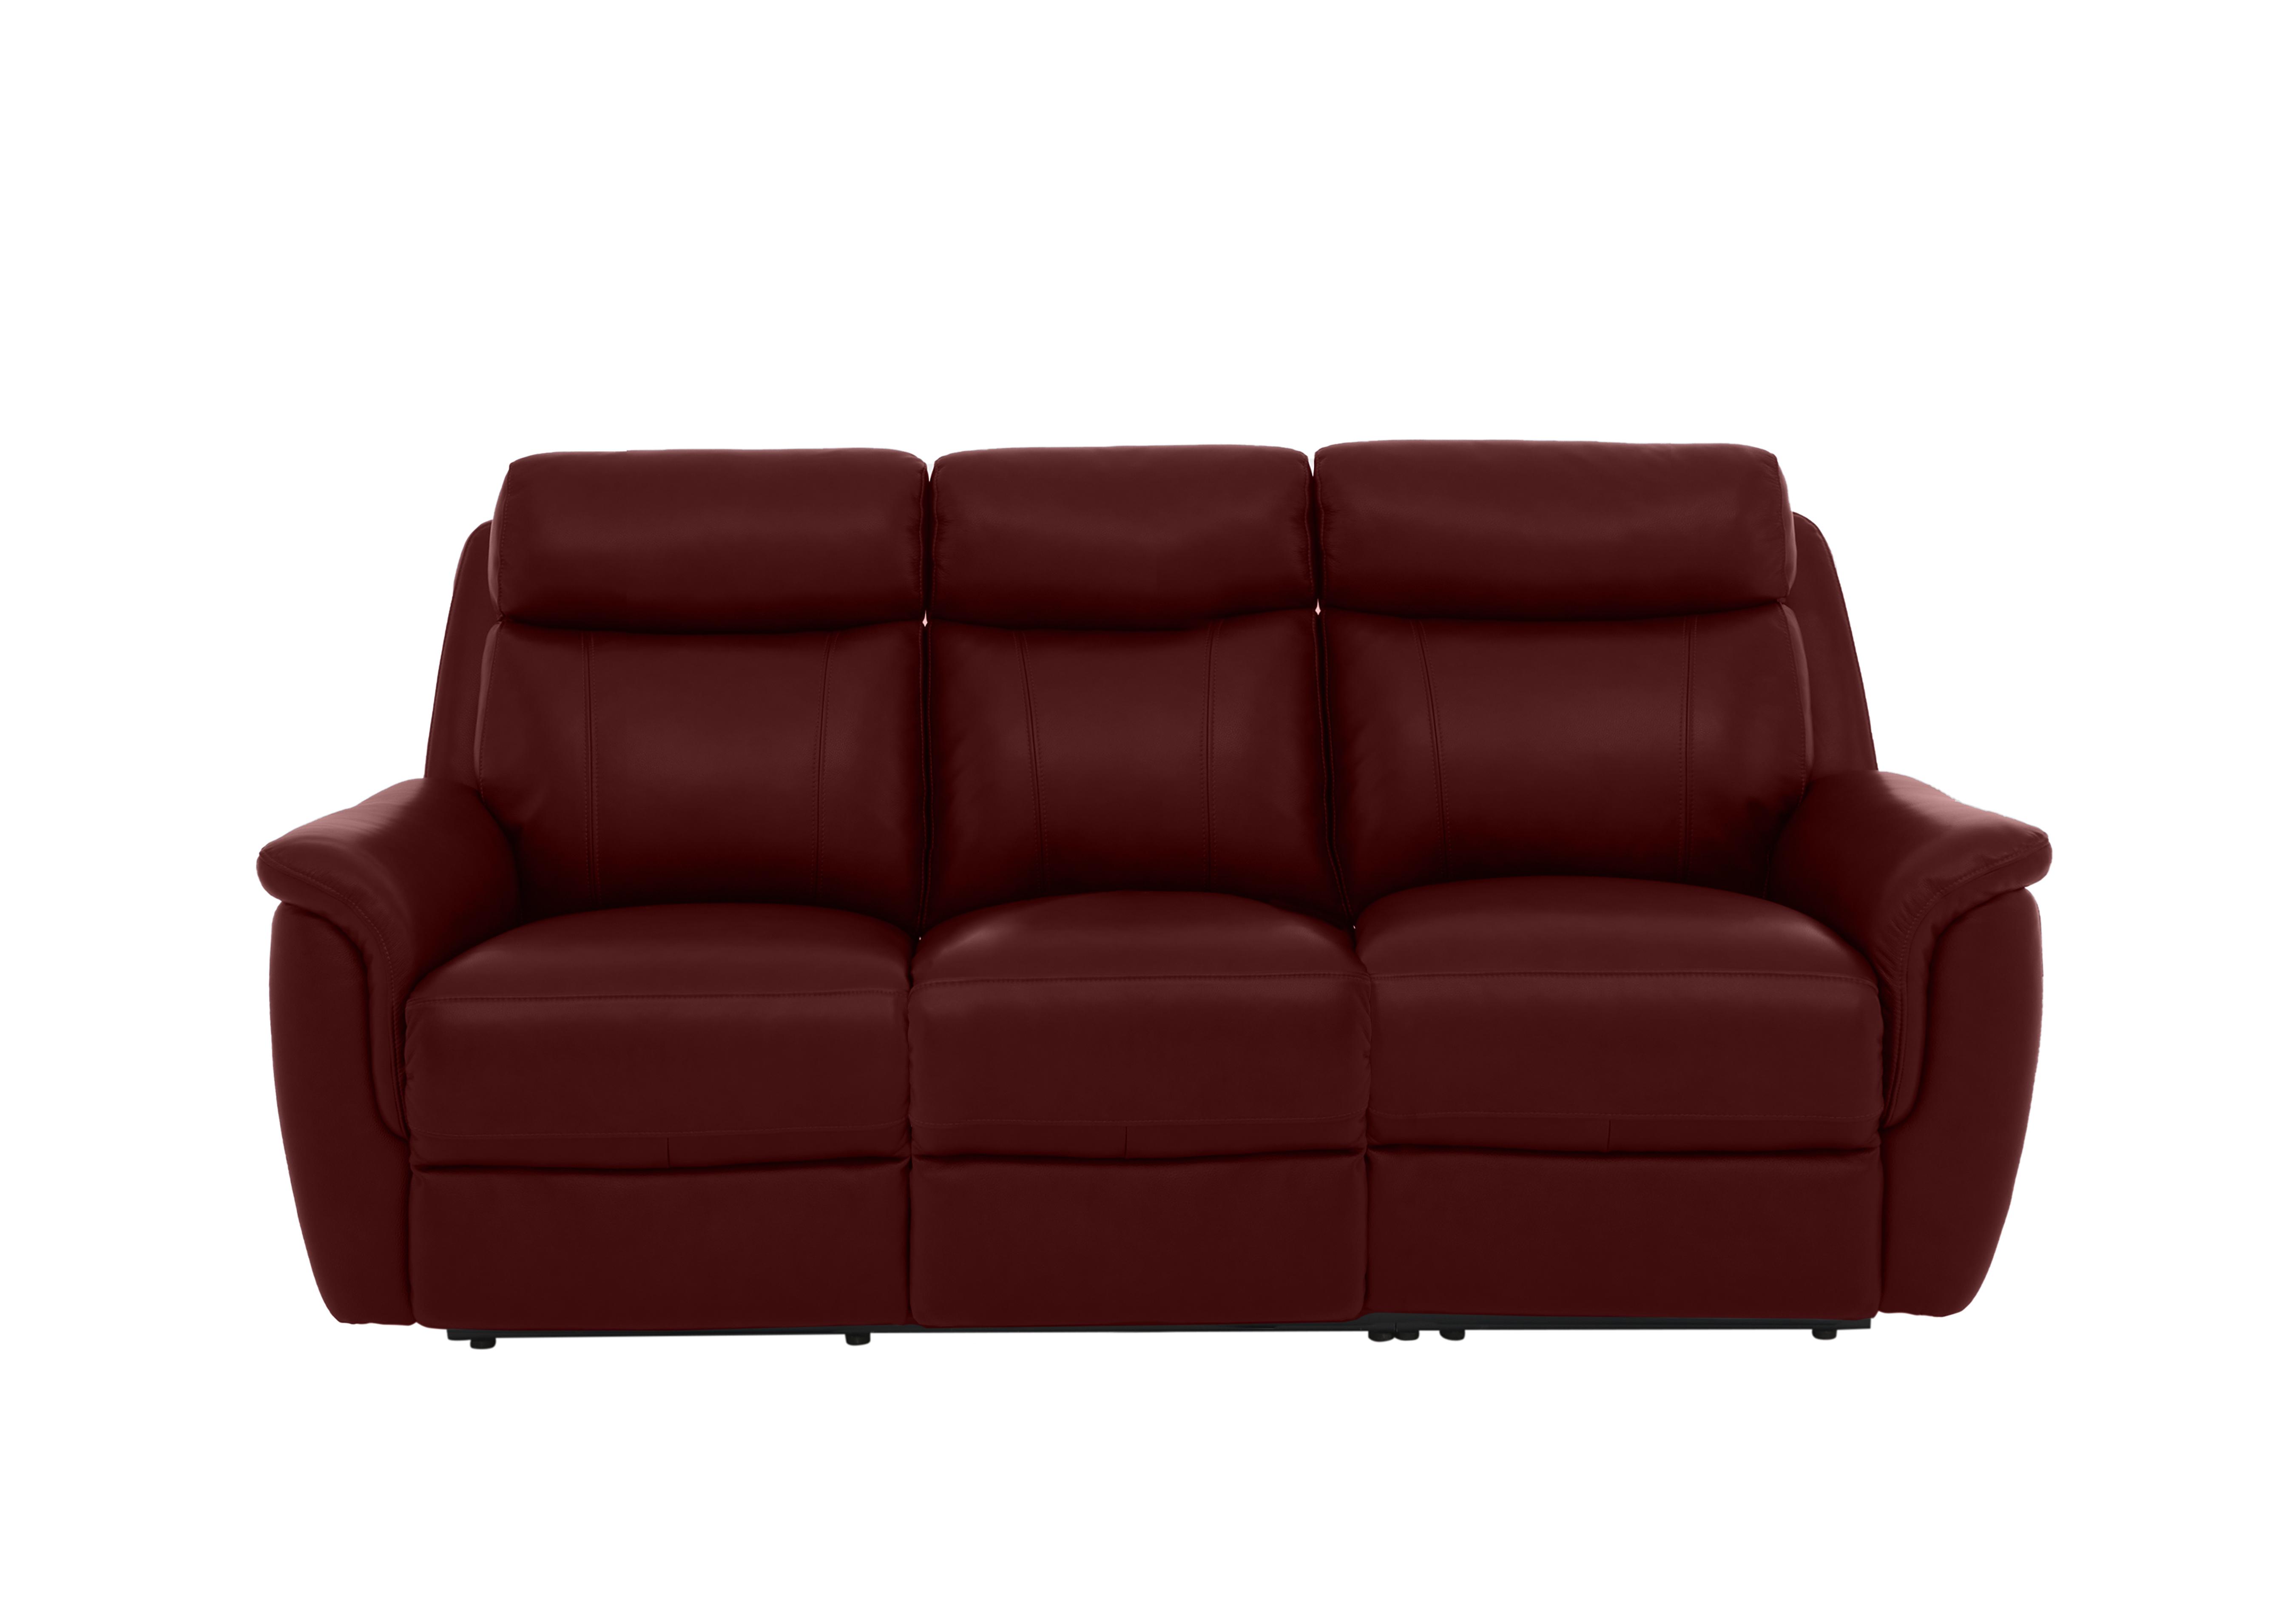 Orlando 3 Seater Leather Power Recliner Sofa with Power Headrests in 60/15 Ruby on Furniture Village